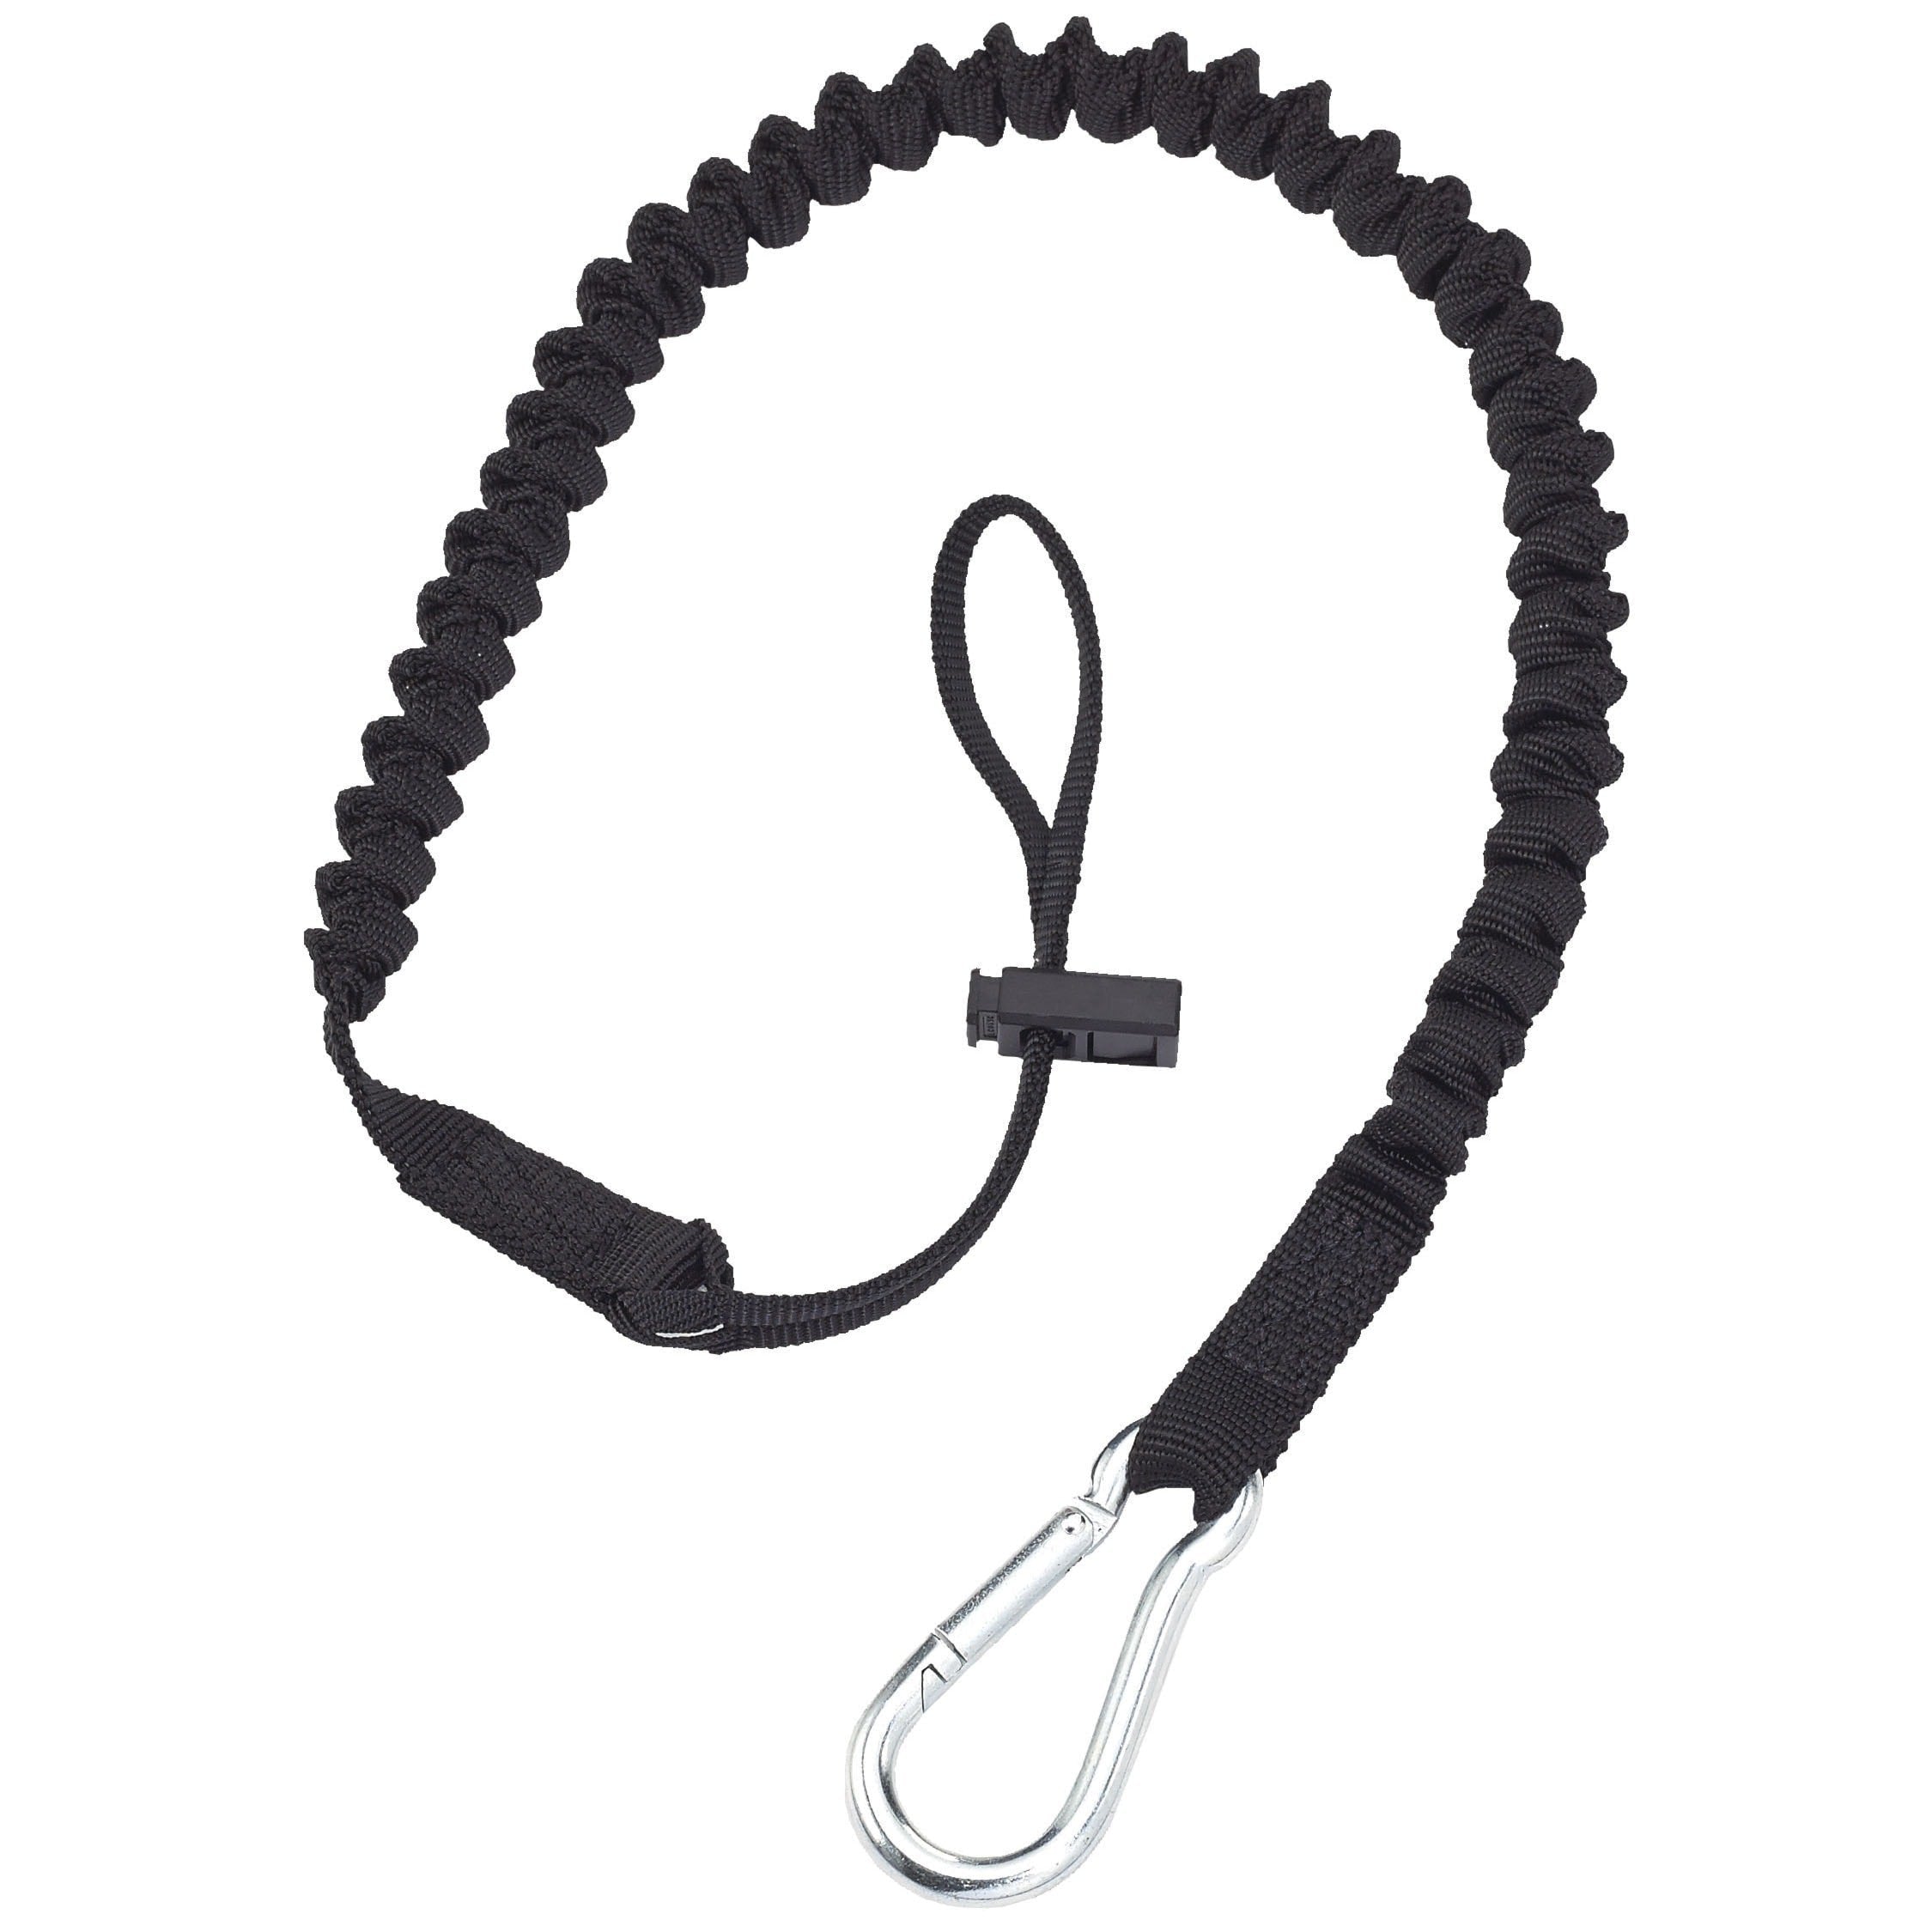 DYNAMIC SAFETY INTERNATIONAL FPTOOLTETHER Lanyard Tool Tether 15 lb, 85 cm Working, 135 cm Stretchable L